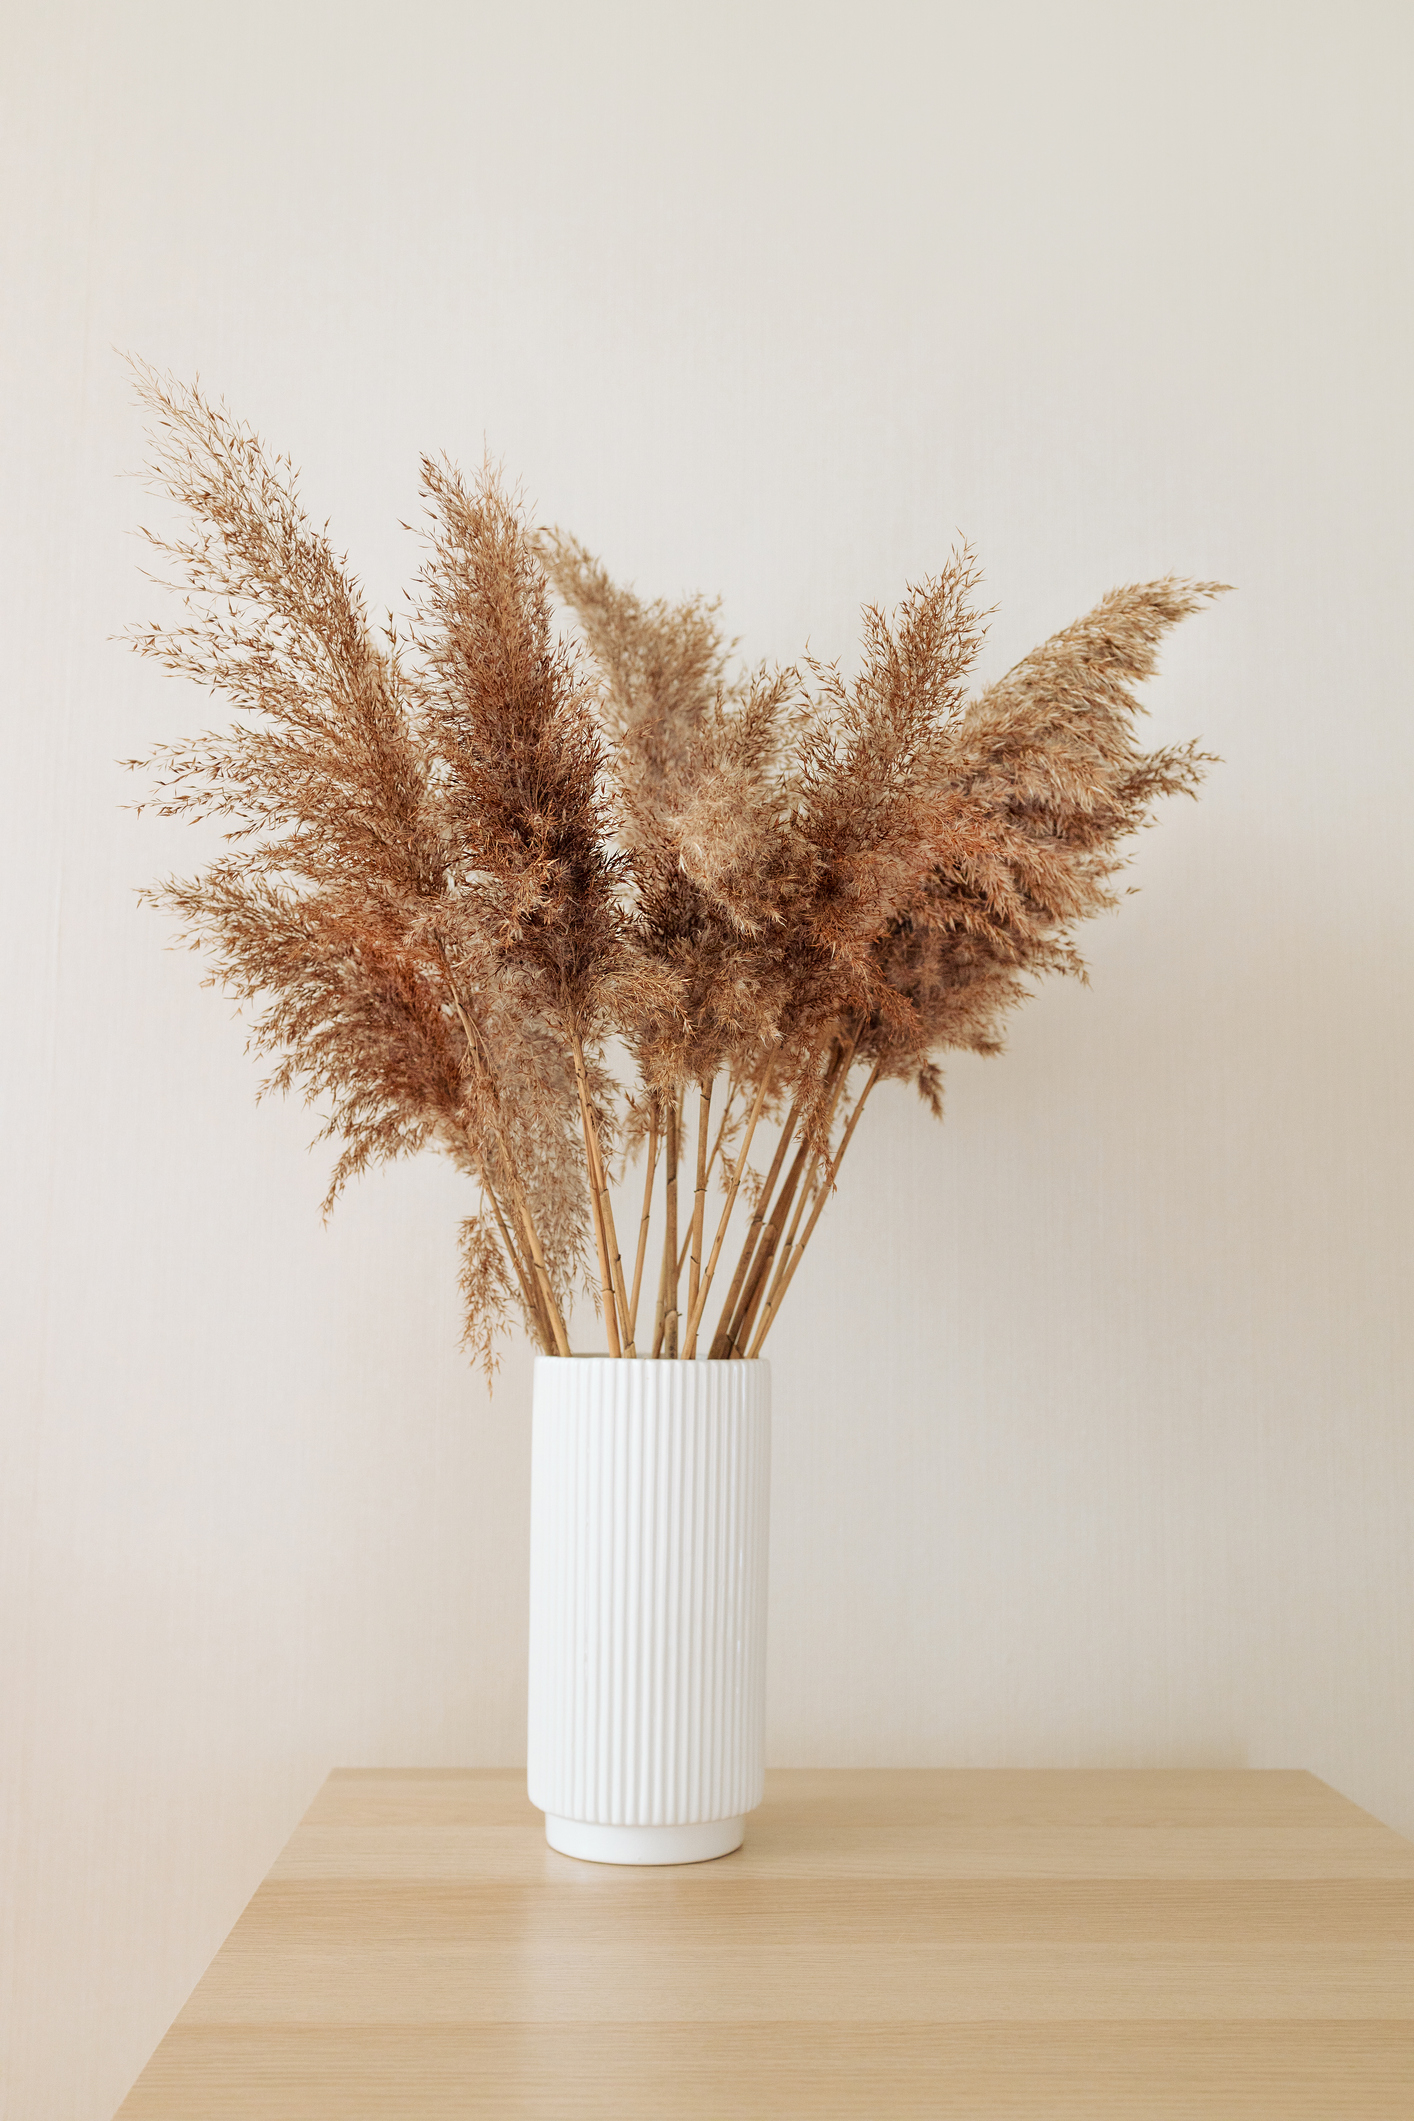 A vase of pampas grass on a wooden table against a neutral wall